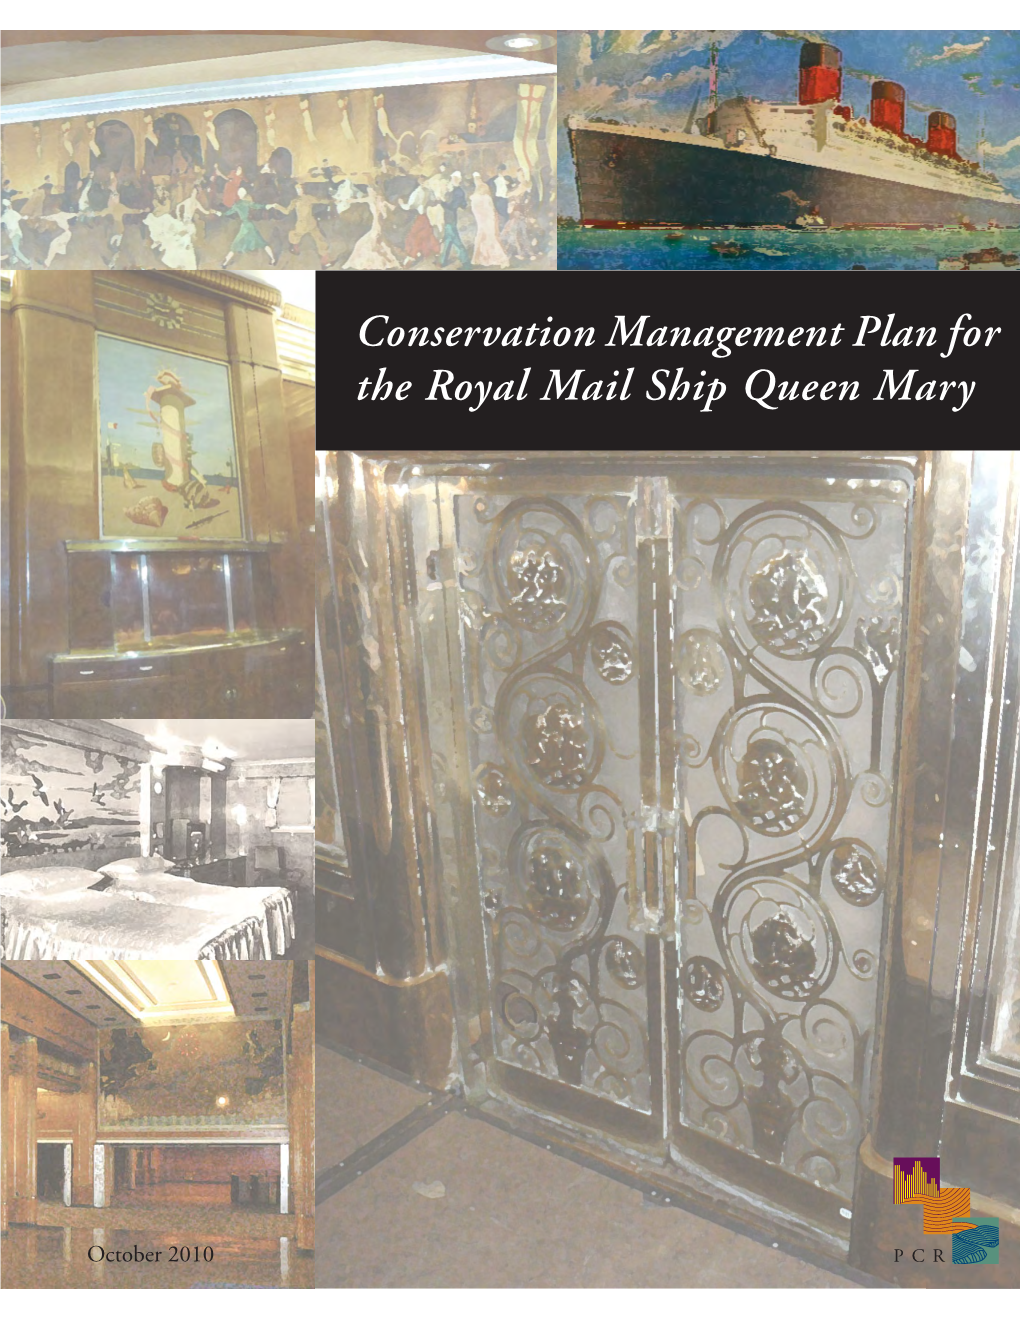 Conservation Management Plan for the Royal Mail Ship Queen Mary